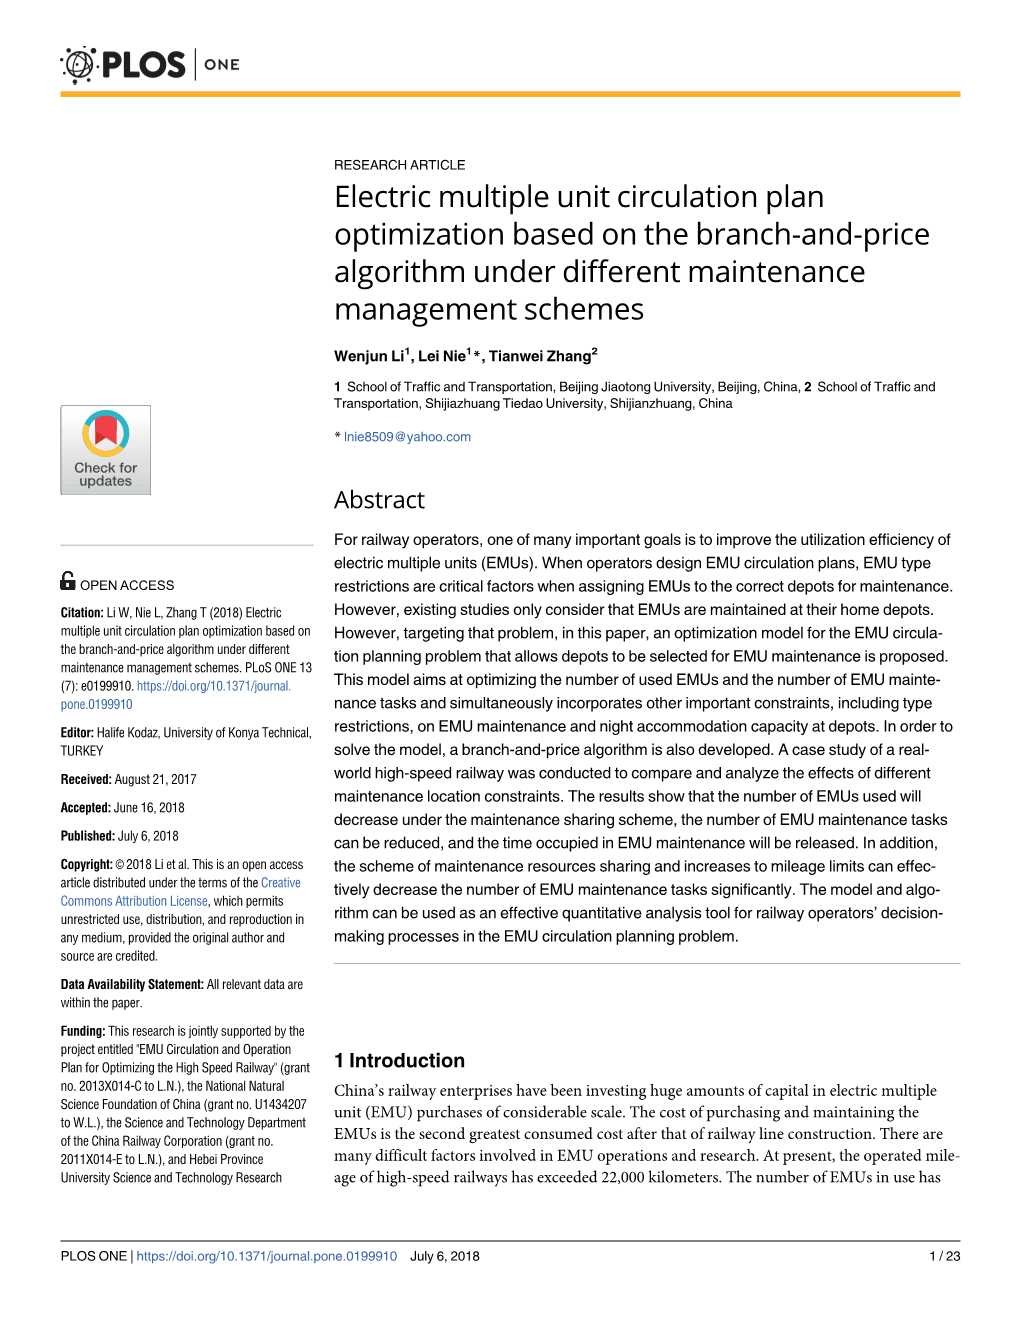 Electric Multiple Unit Circulation Plan Optimization Based on the Branch-And-Price Algorithm Under Different Maintenance Management Schemes